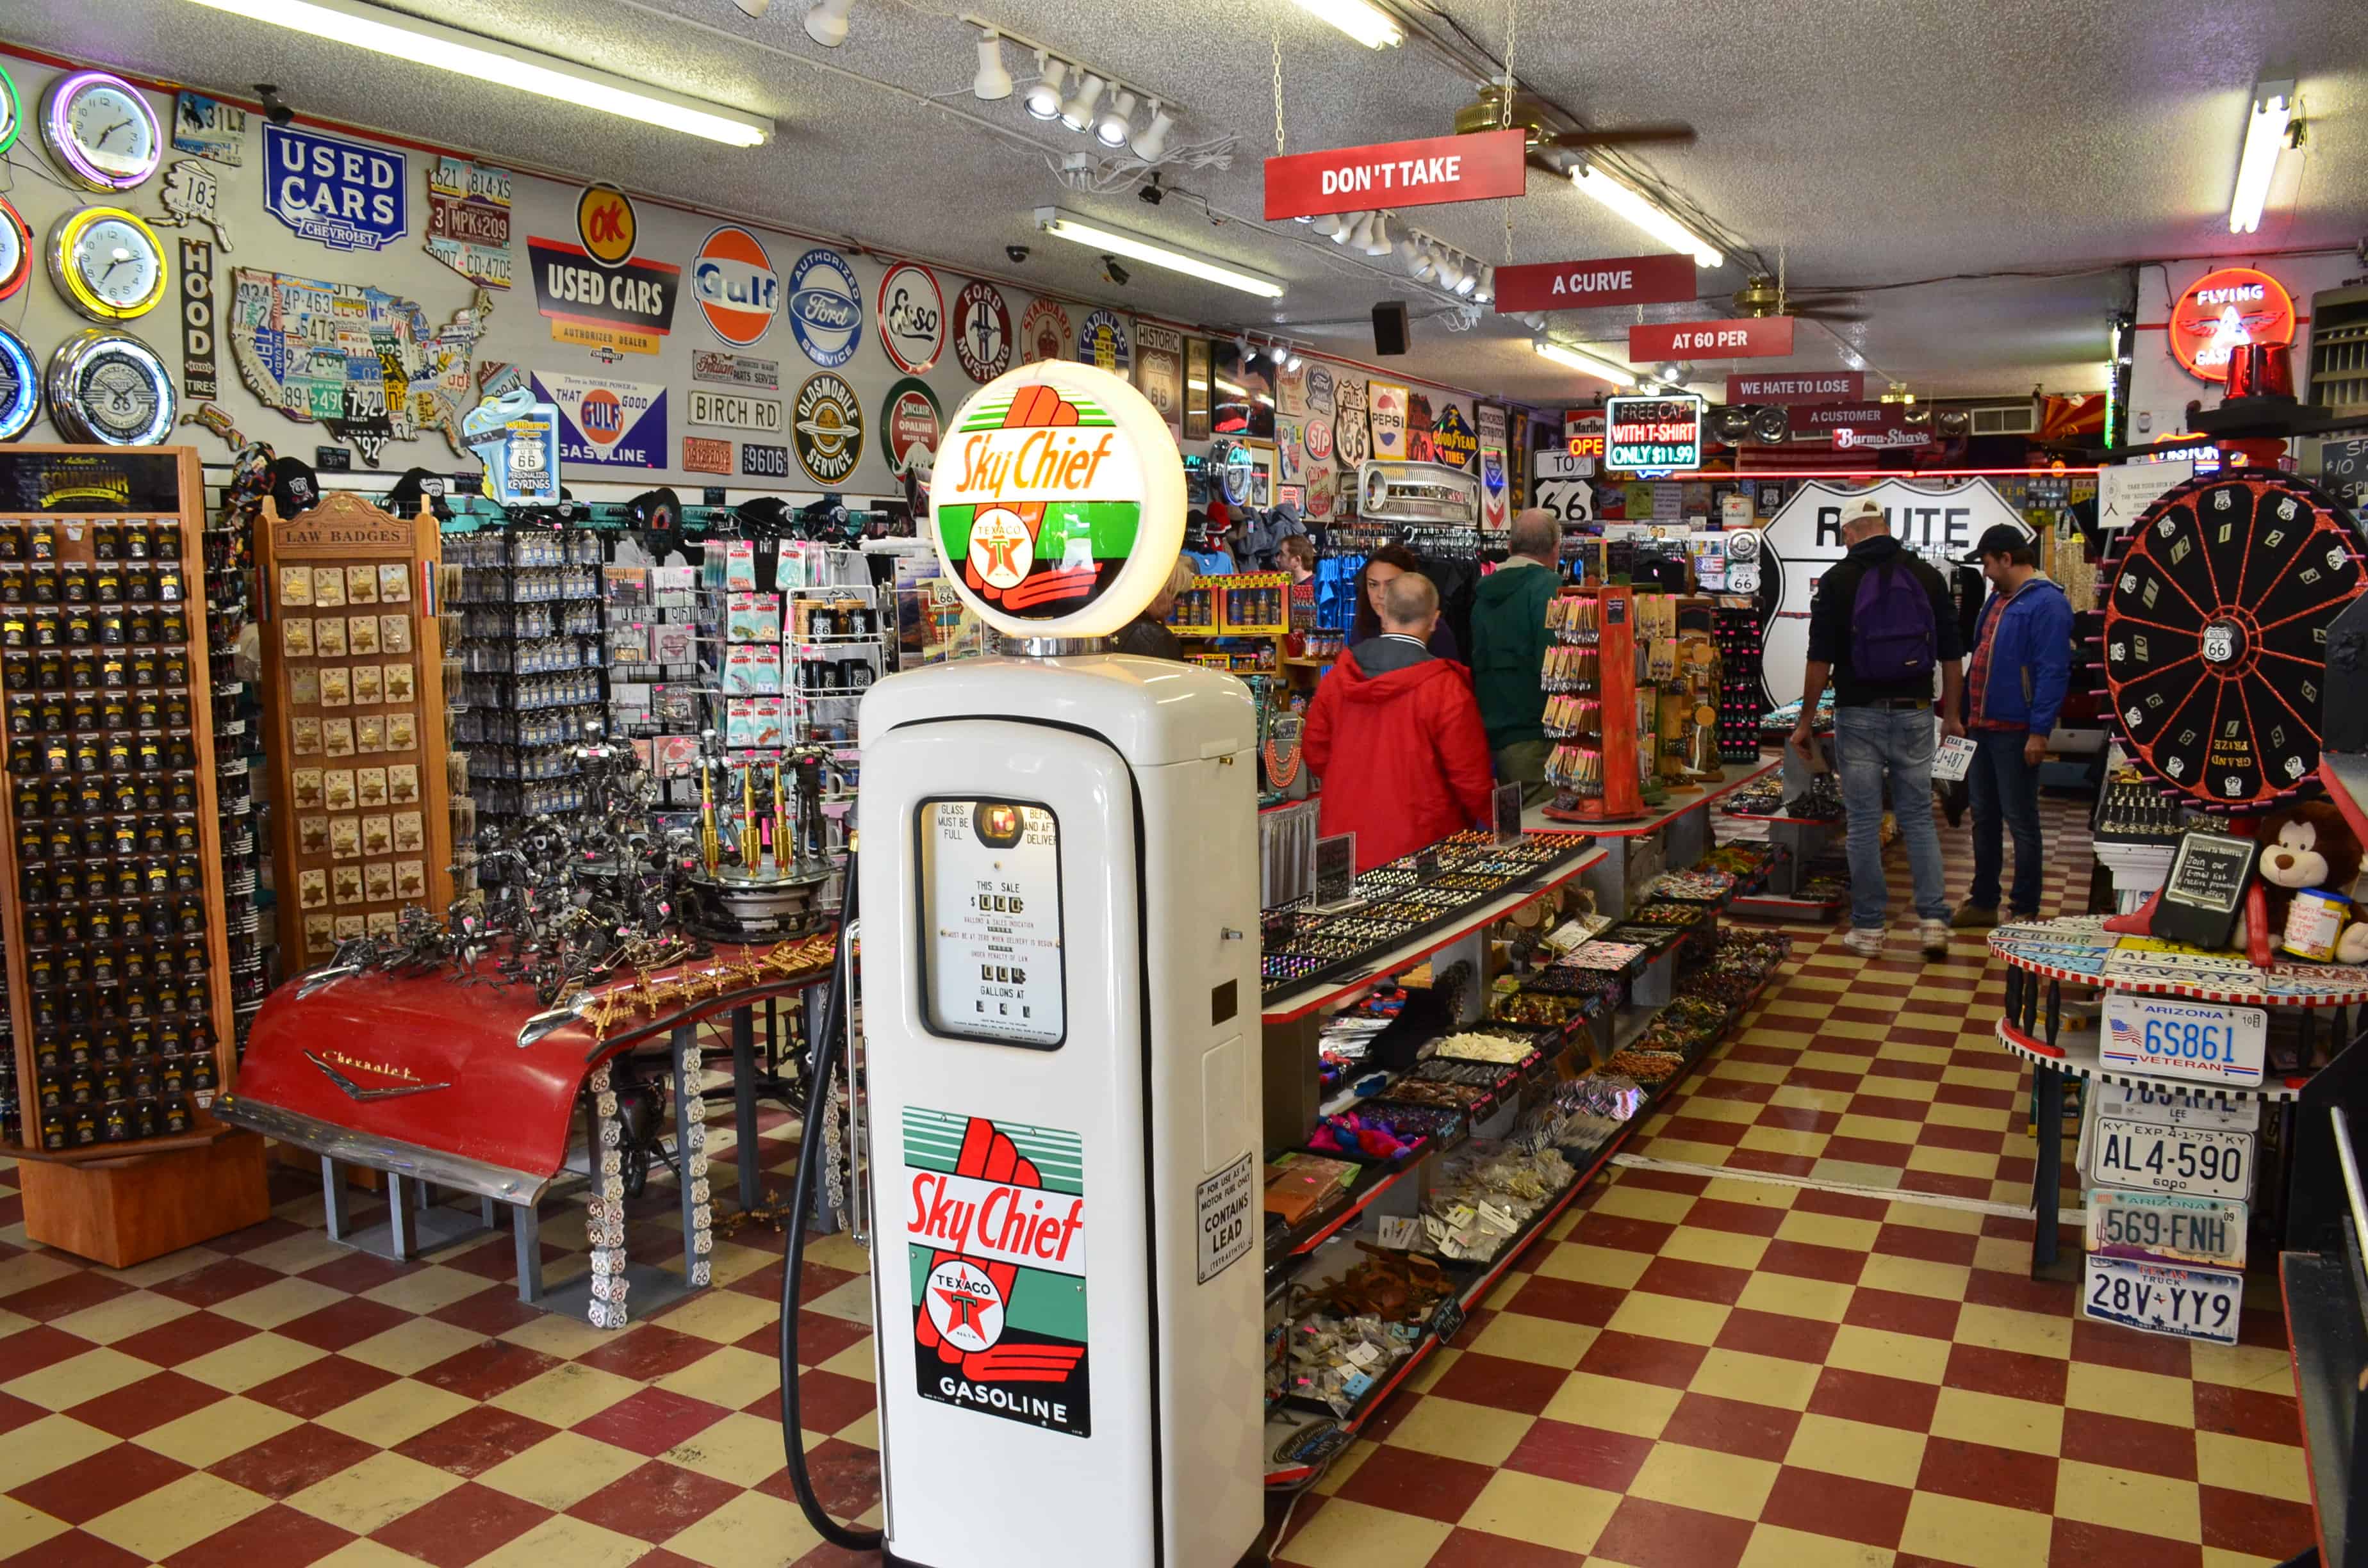 Inside Addicted to Route 66 in Williams, Arizona